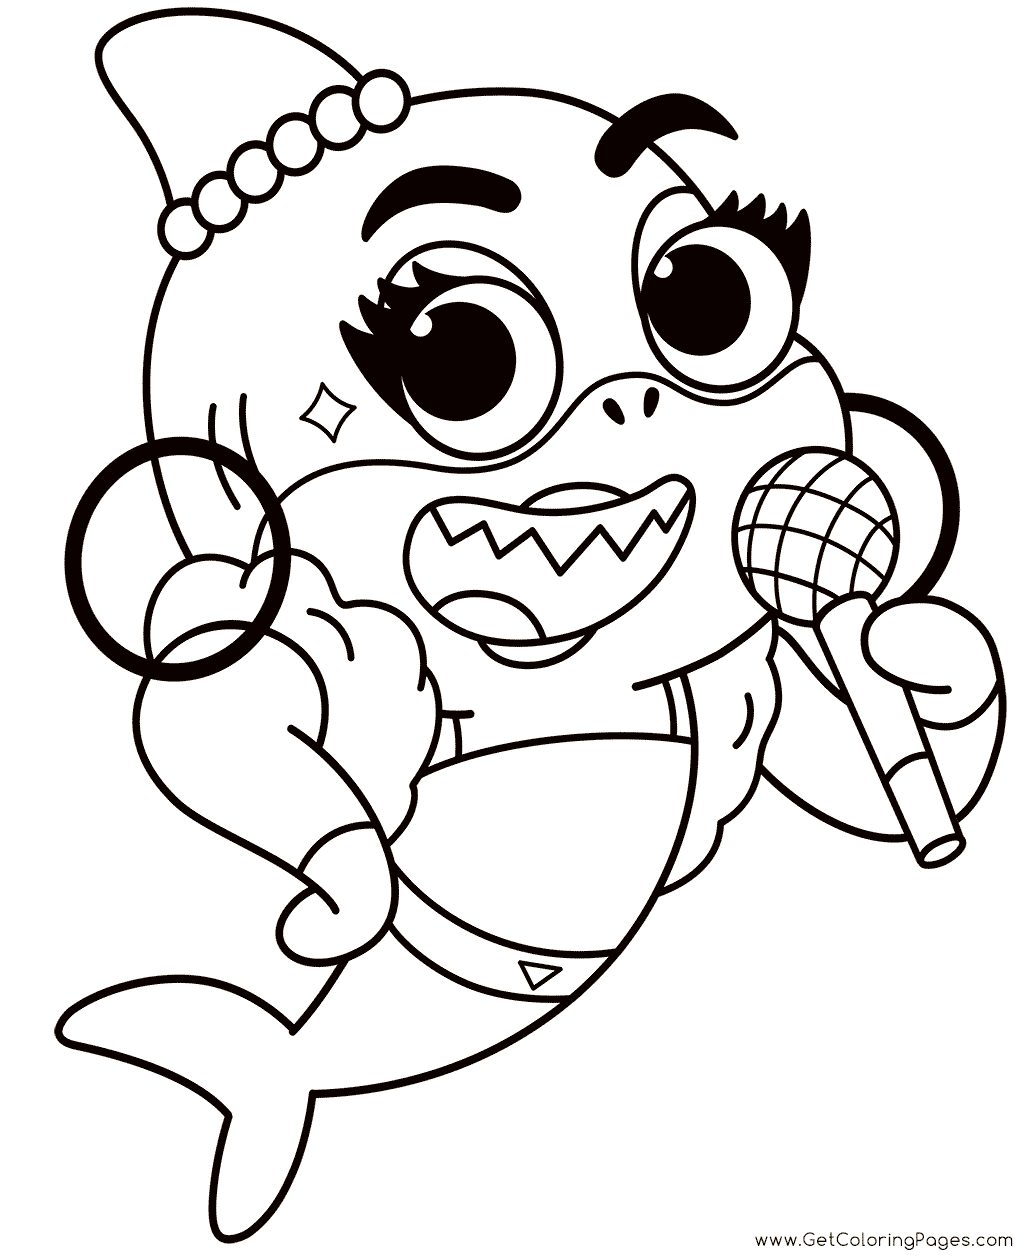 Cardi B Coloring Pages - Get Coloring Pages